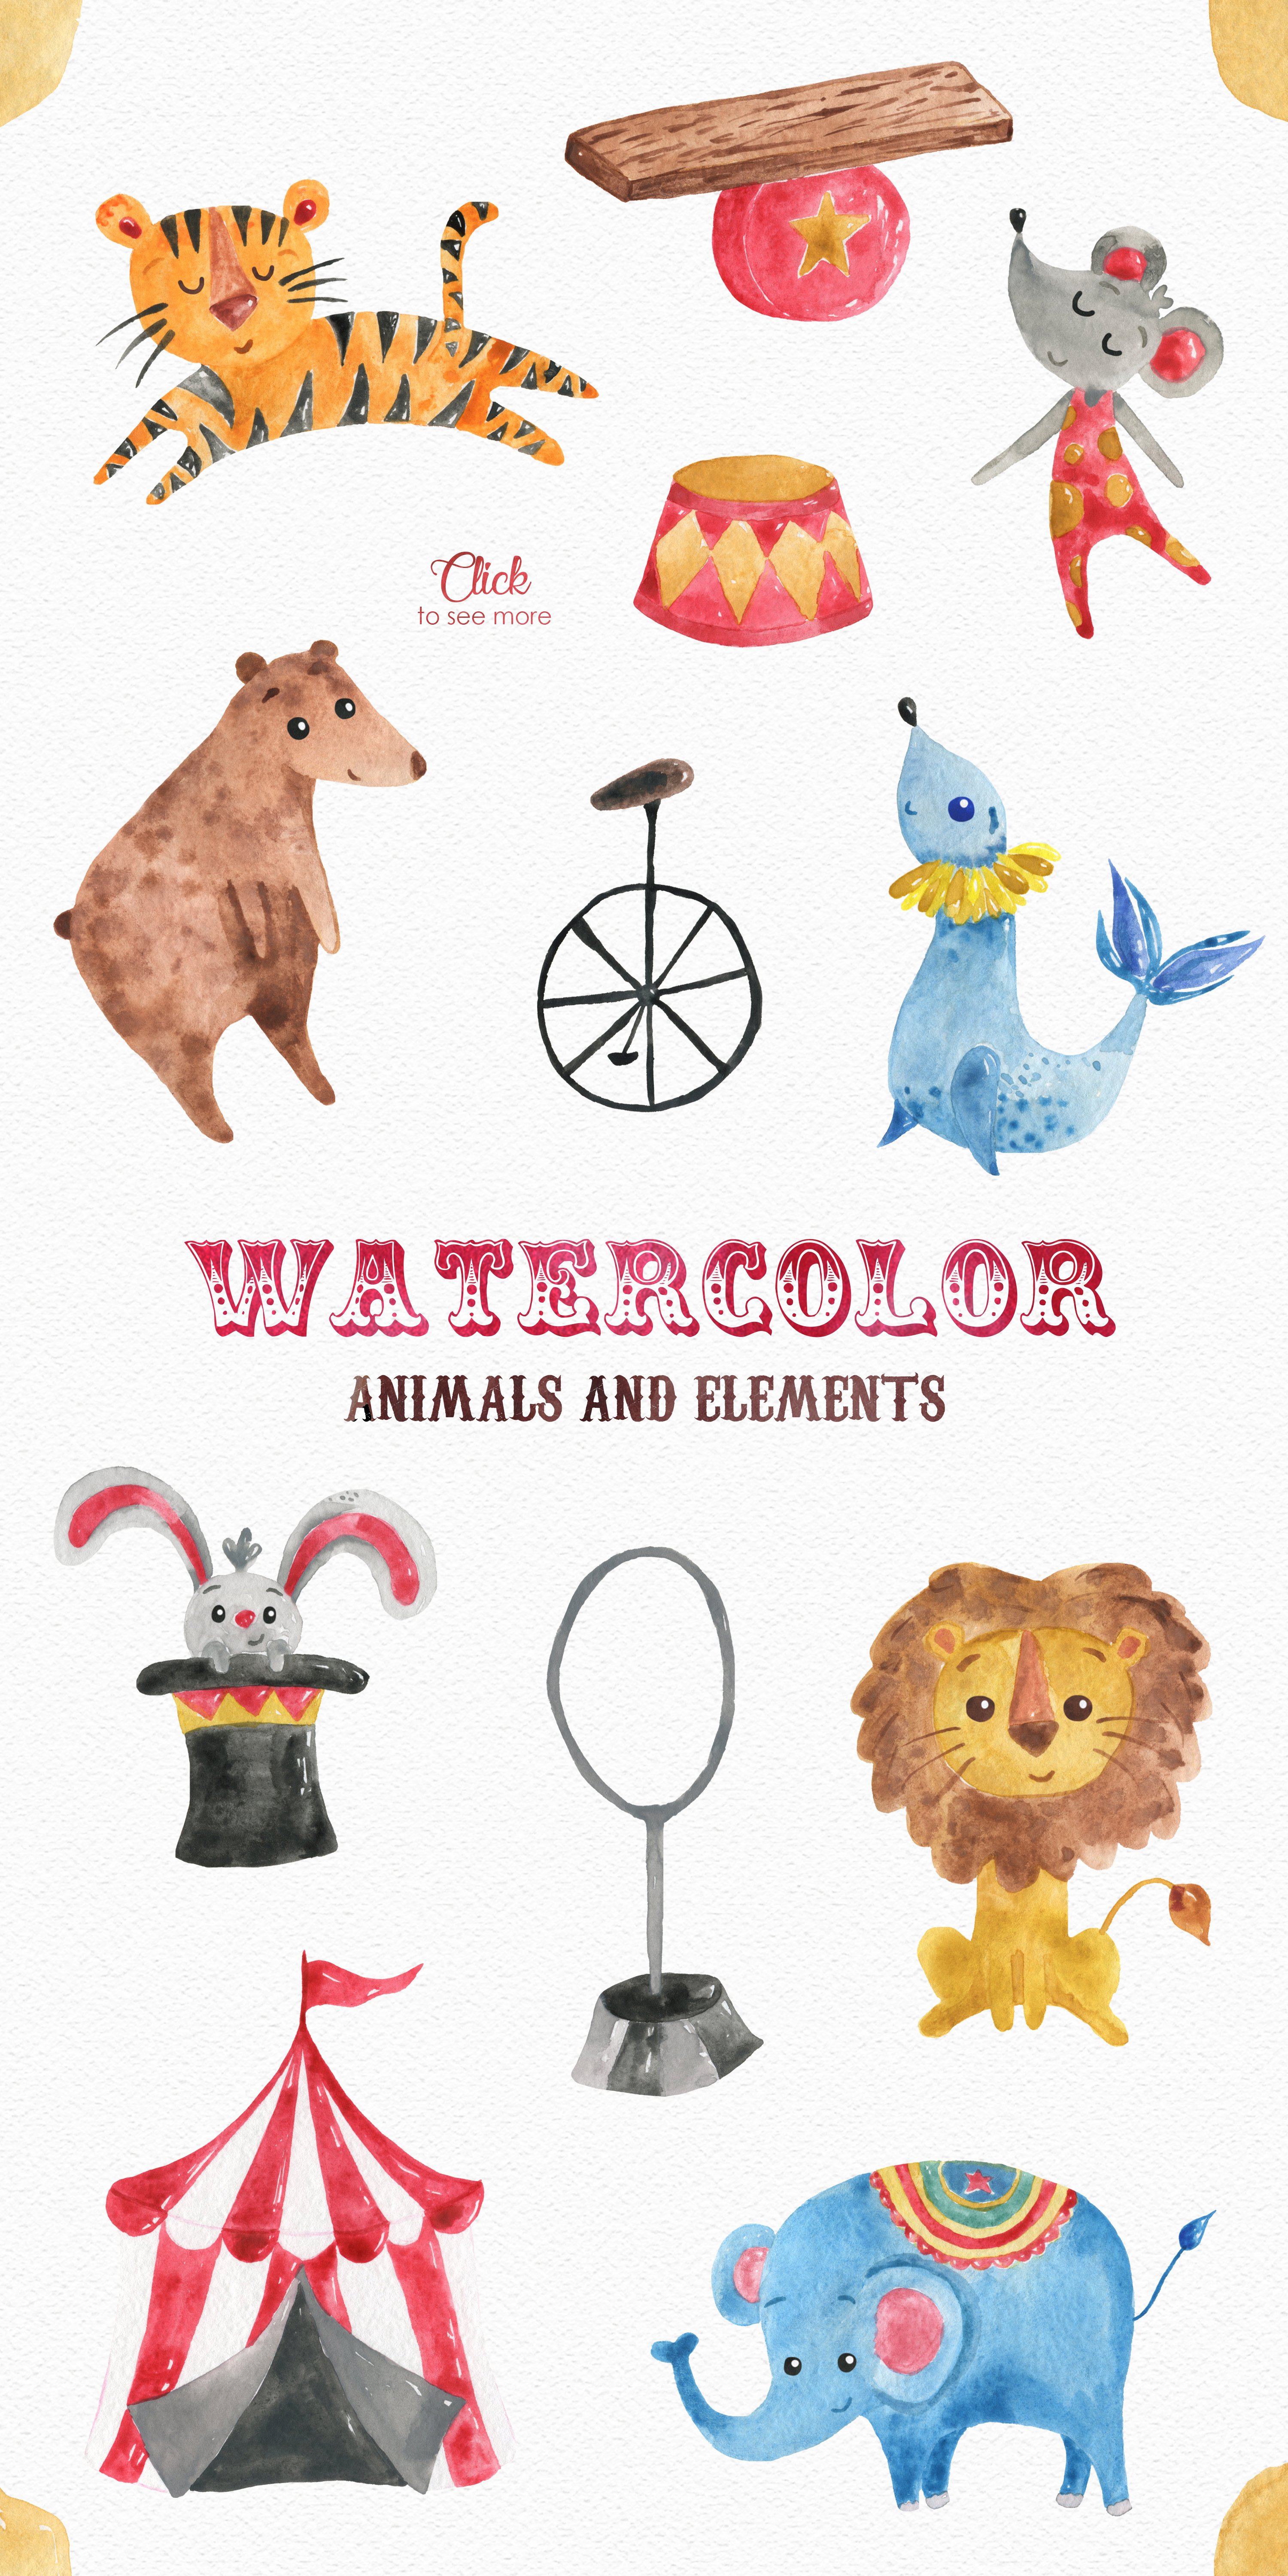 Watercolor characters and animals preview.